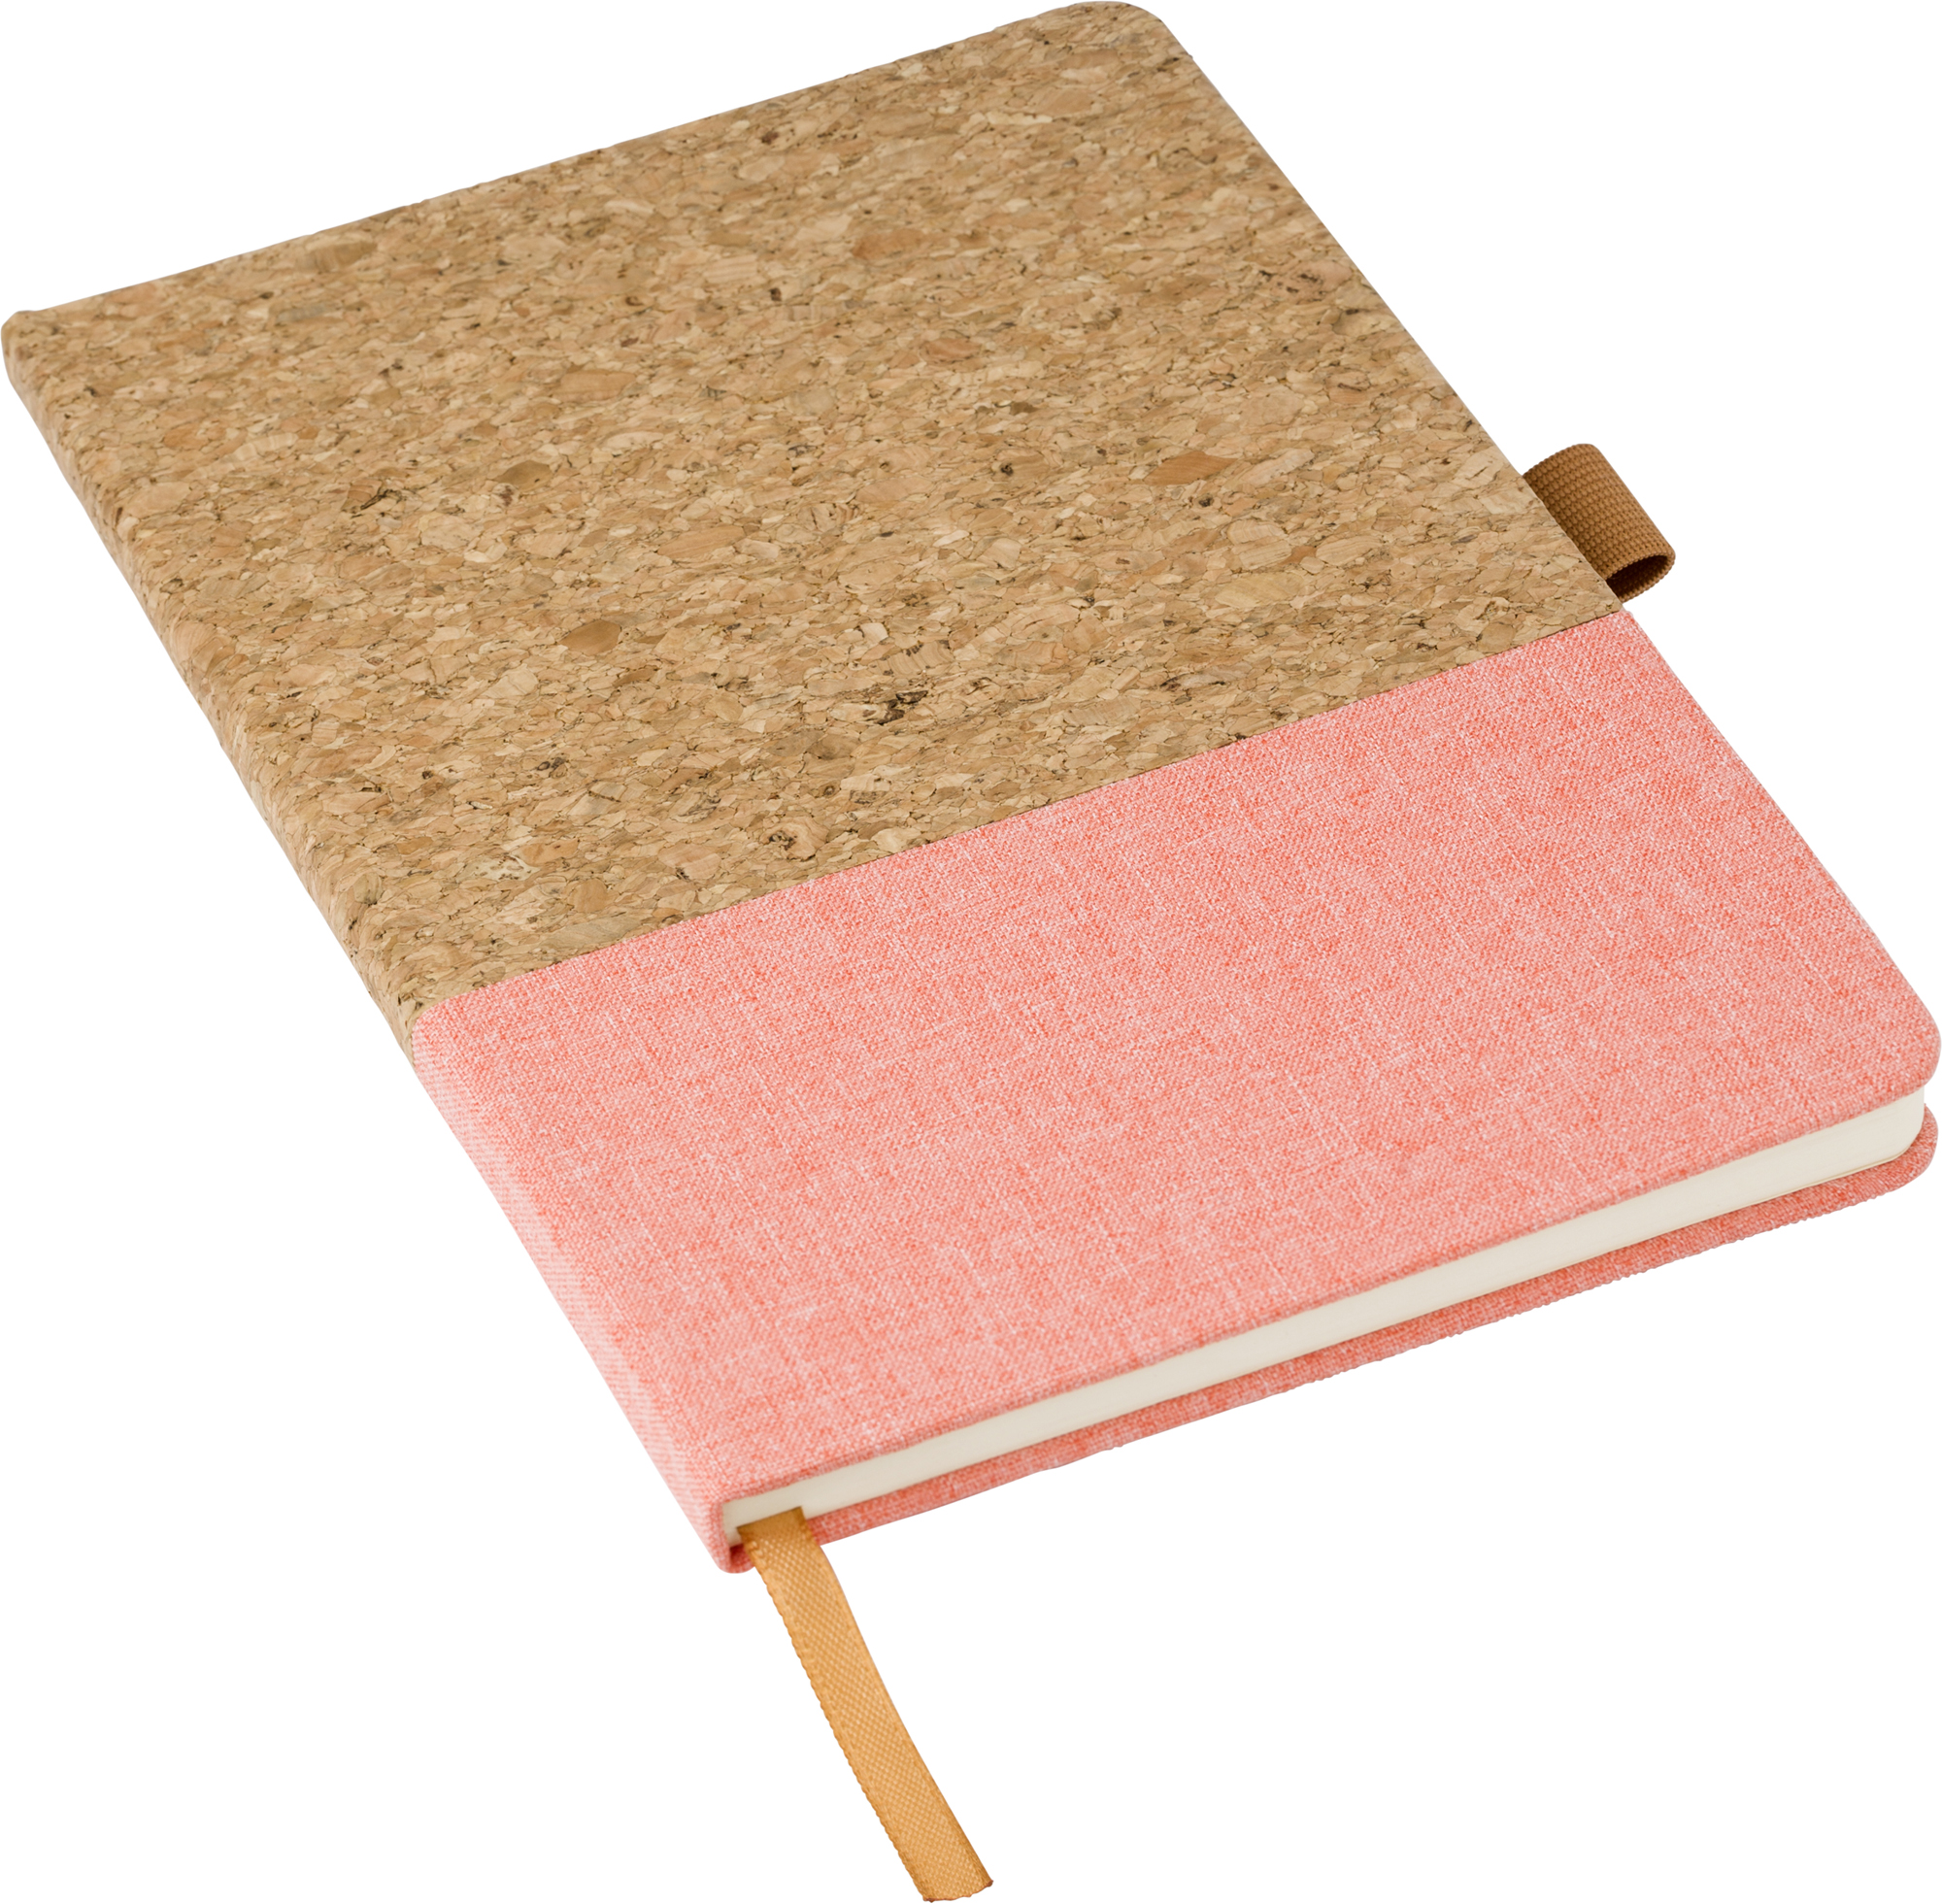 000000967381 236999999 3d145 lft pro01 2023 fal - Cork and cotton notebook (approx. A5)